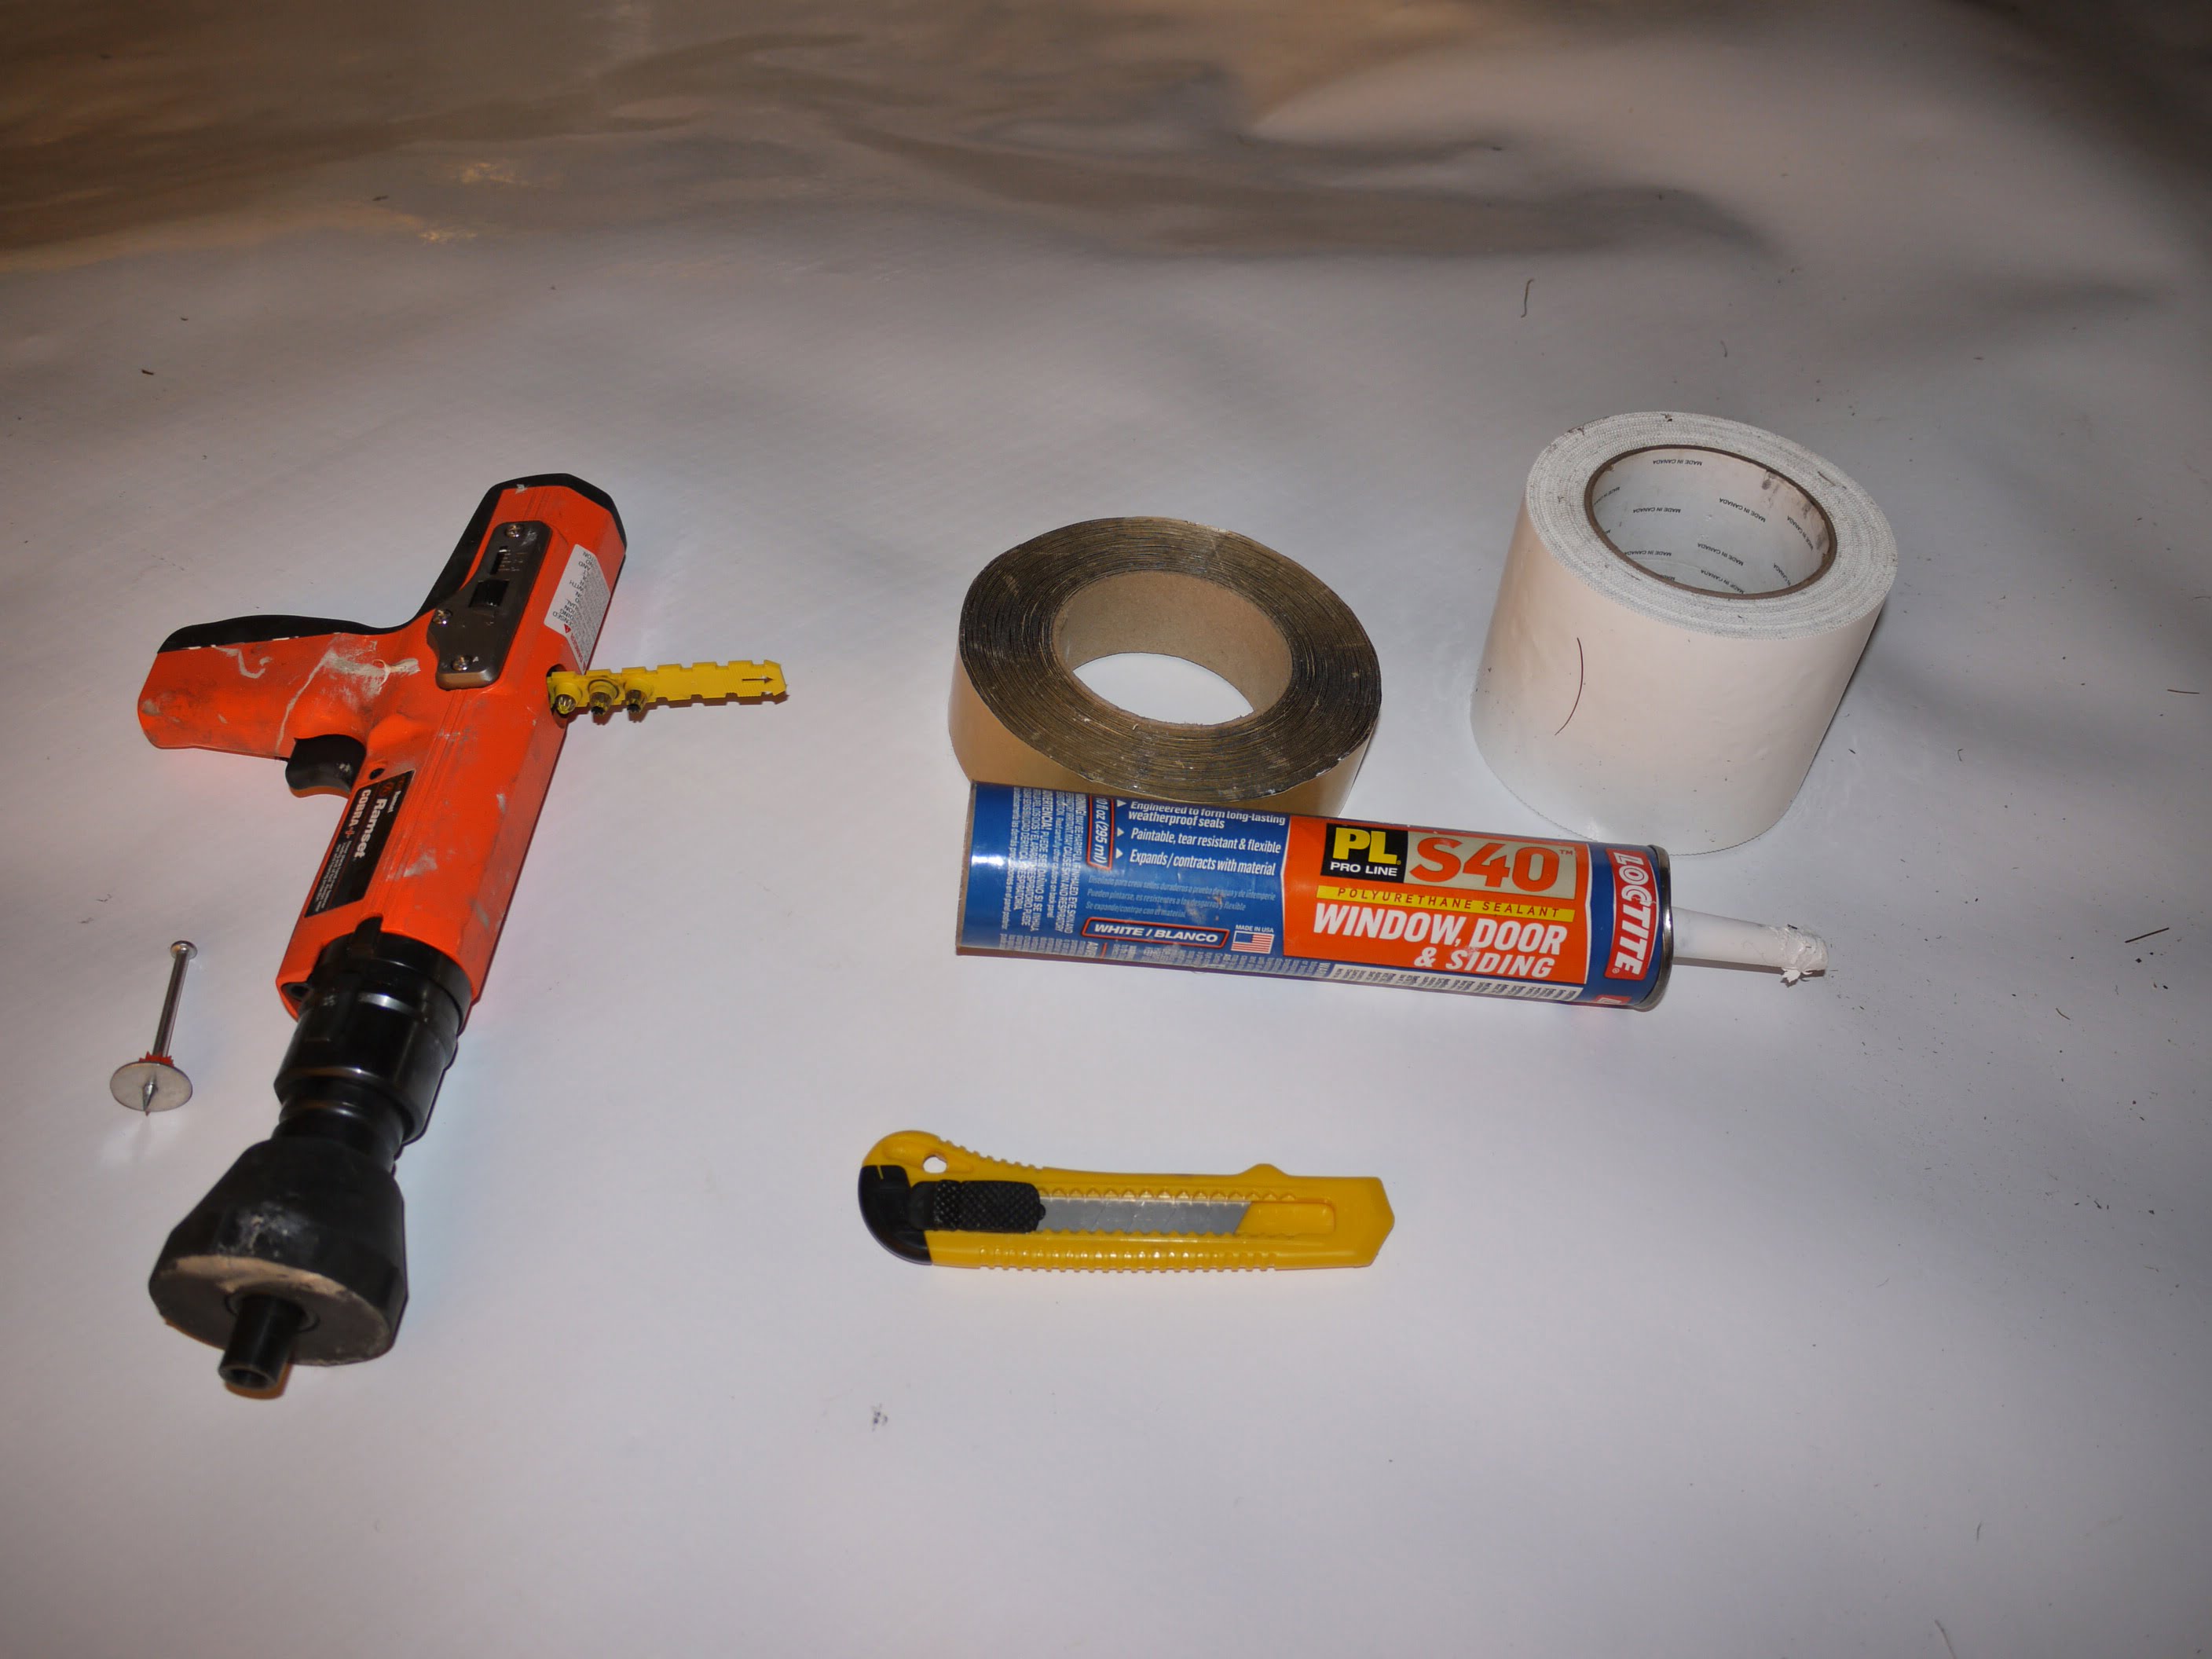 Tools and supplies used to mount vapor barrier to my spray foam foundation walls.